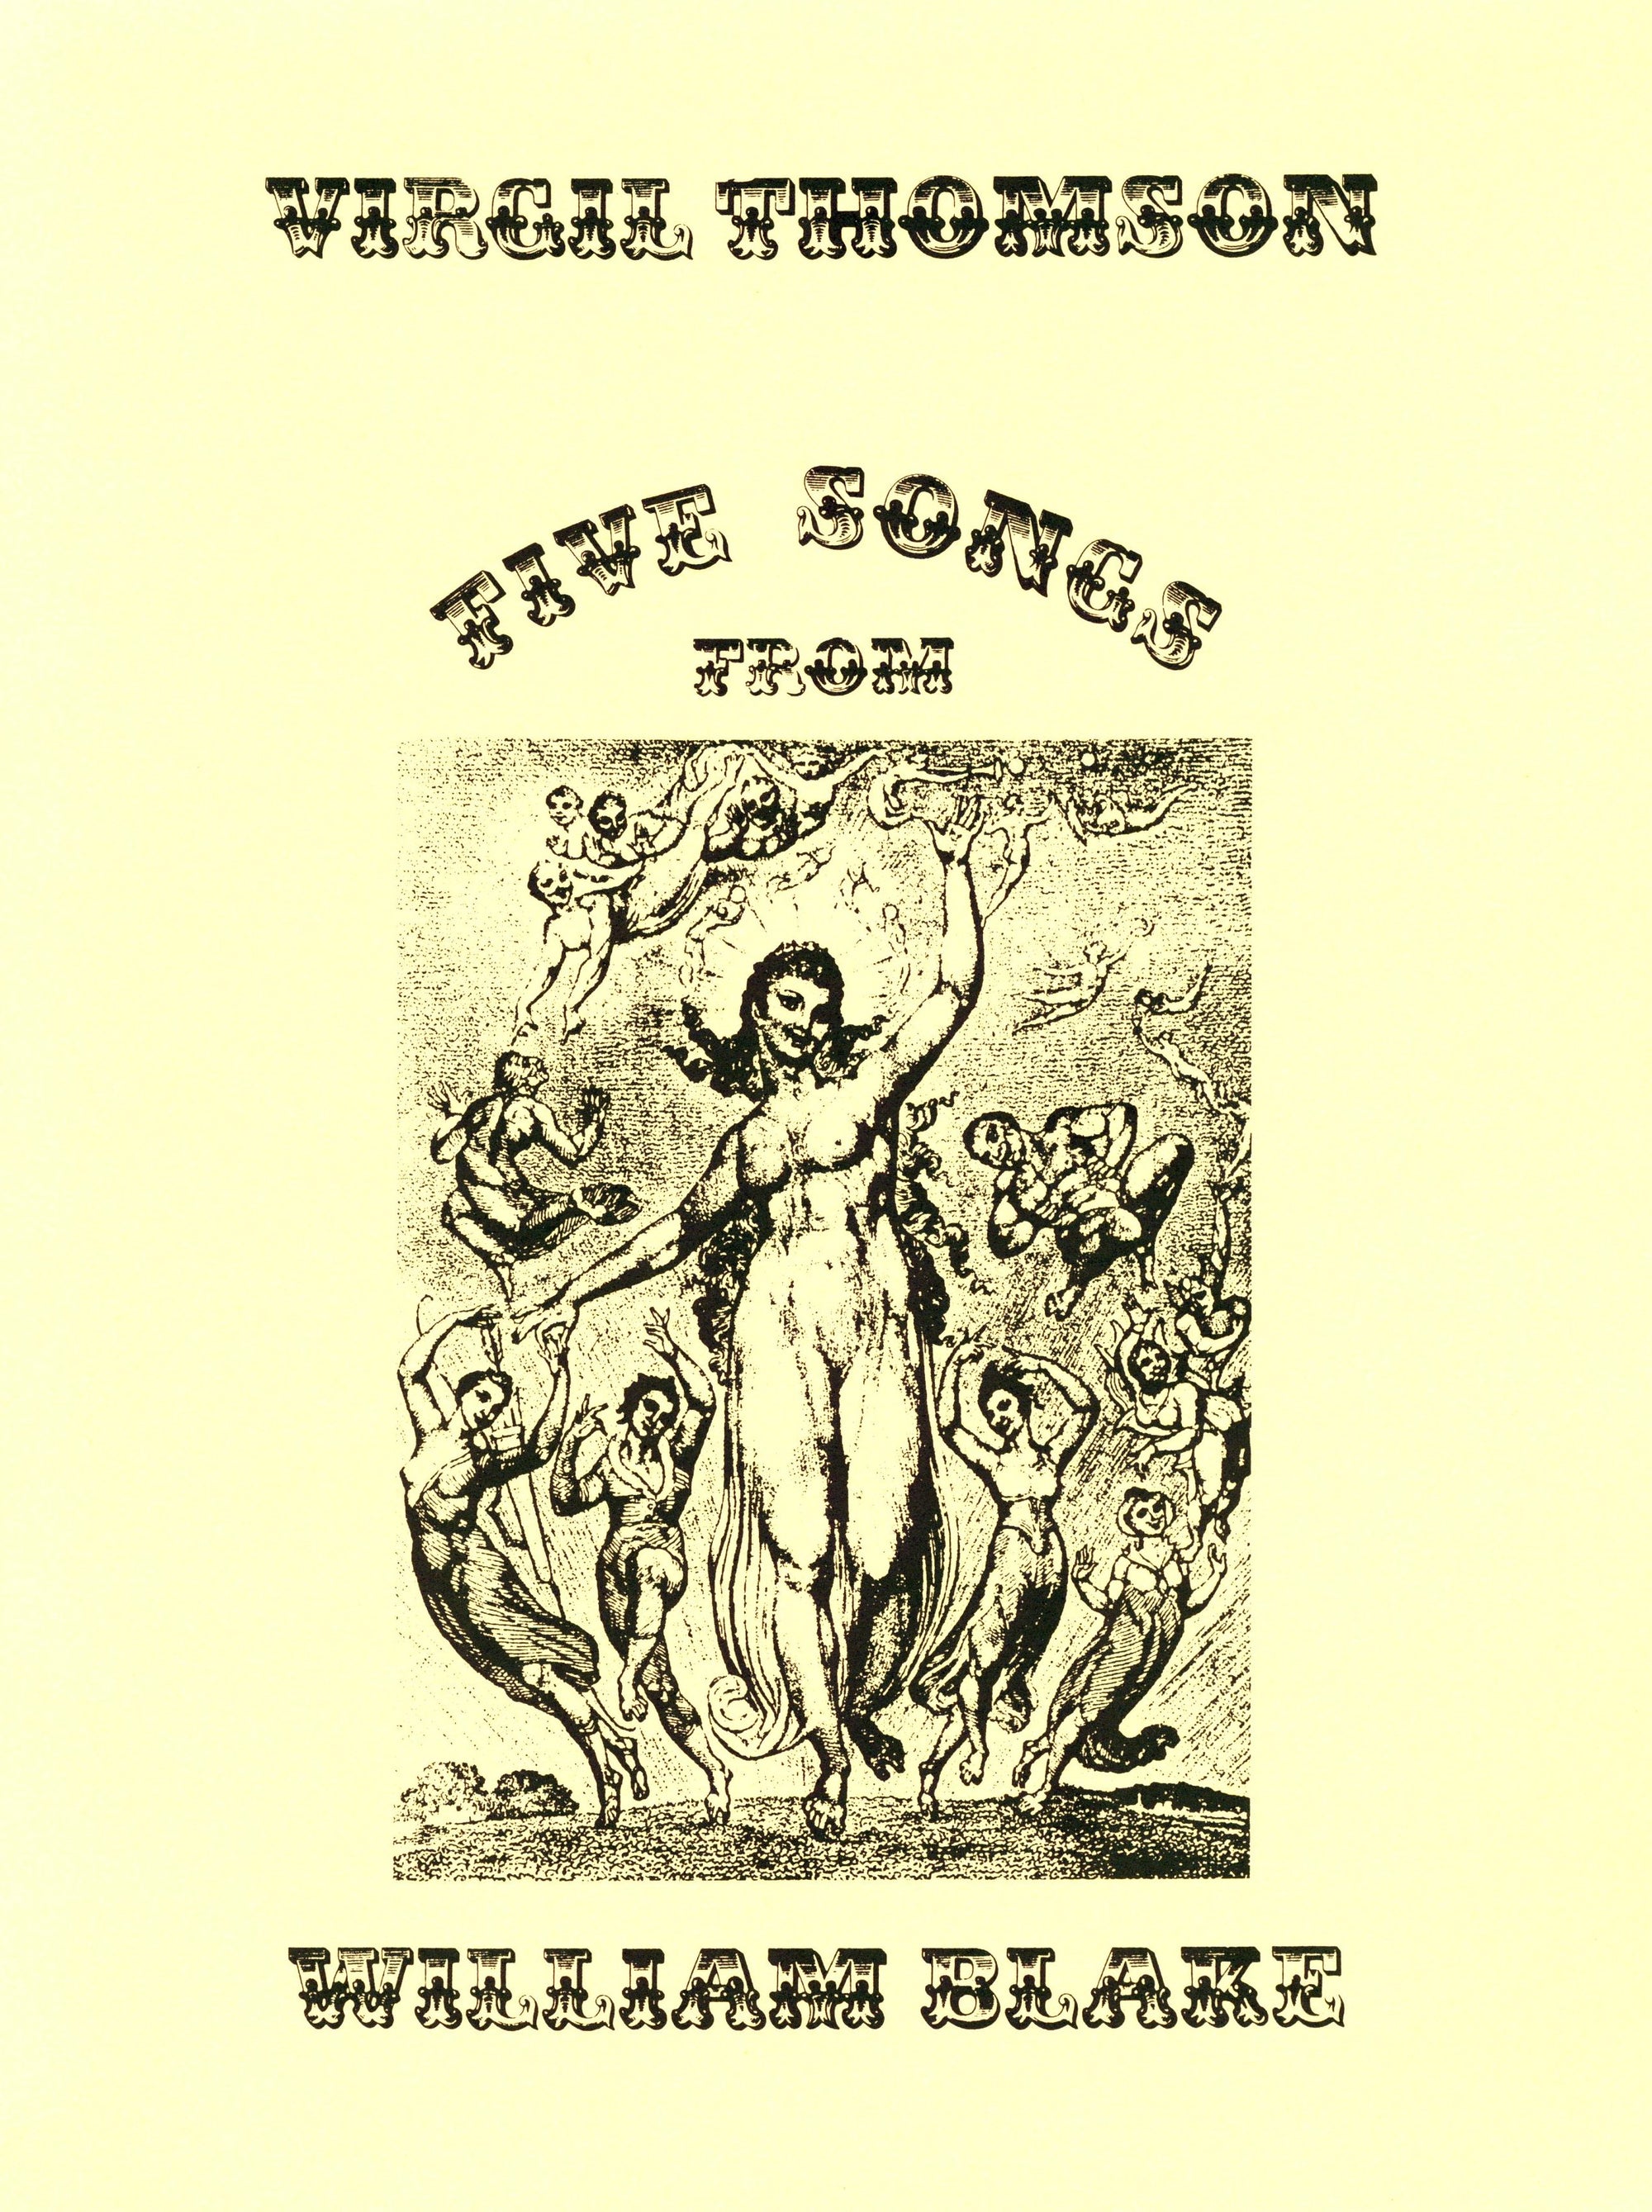 Thomson: 5 Songs from William Blake